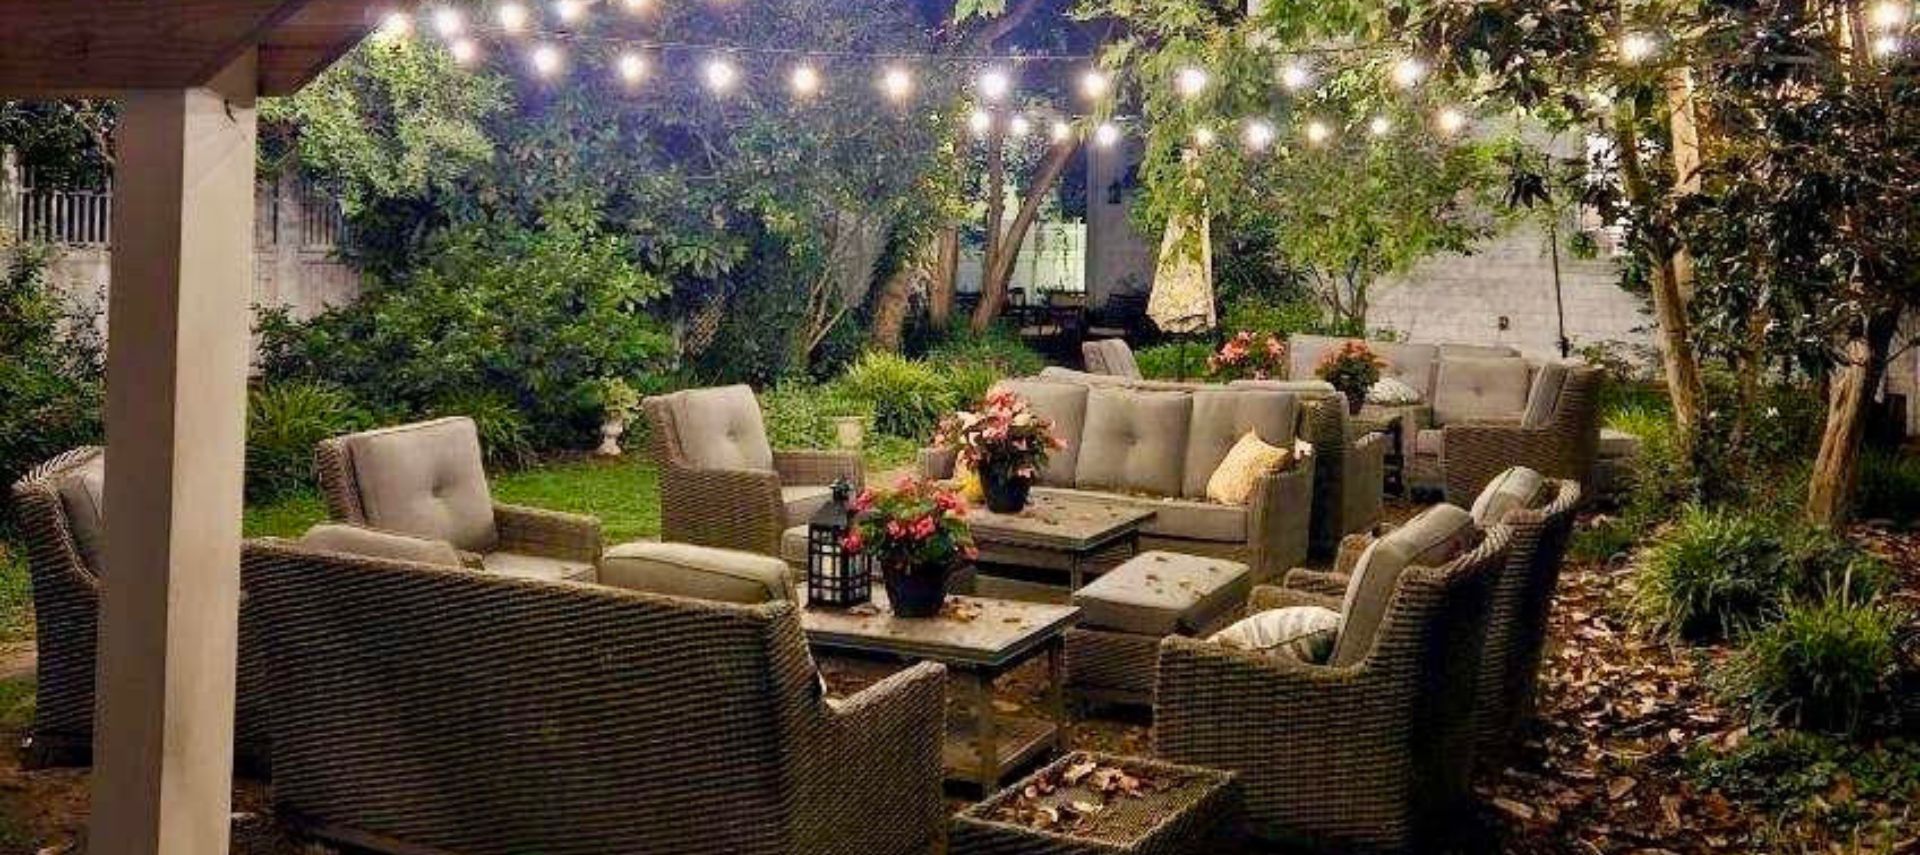 Backyard oasis with patio couches and chairs under strings of little white lights